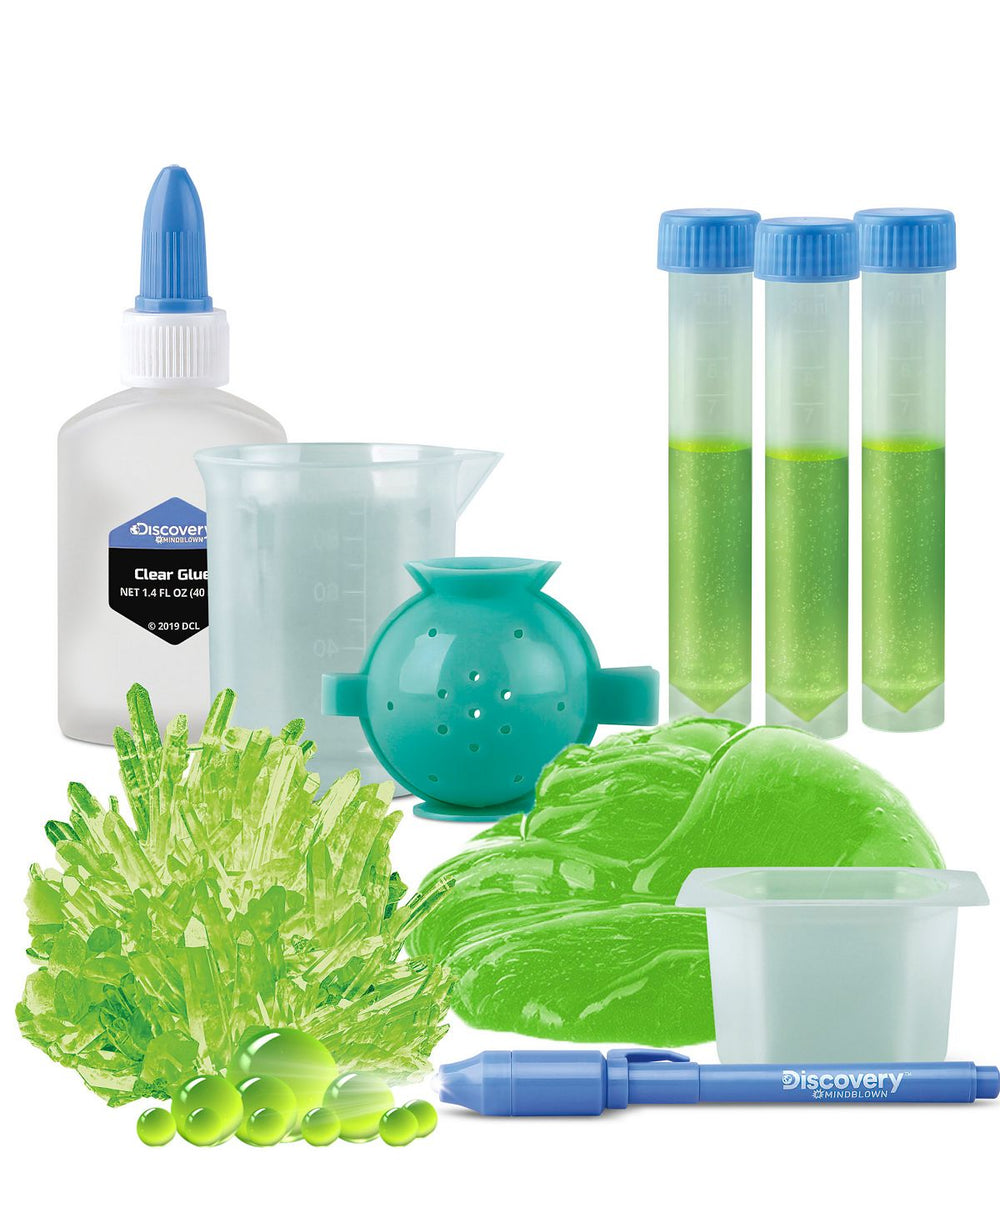 Discovery #MINDBLOWN Glow Science Lab Kit for Kids - Glow-in-the-Dark Experiments